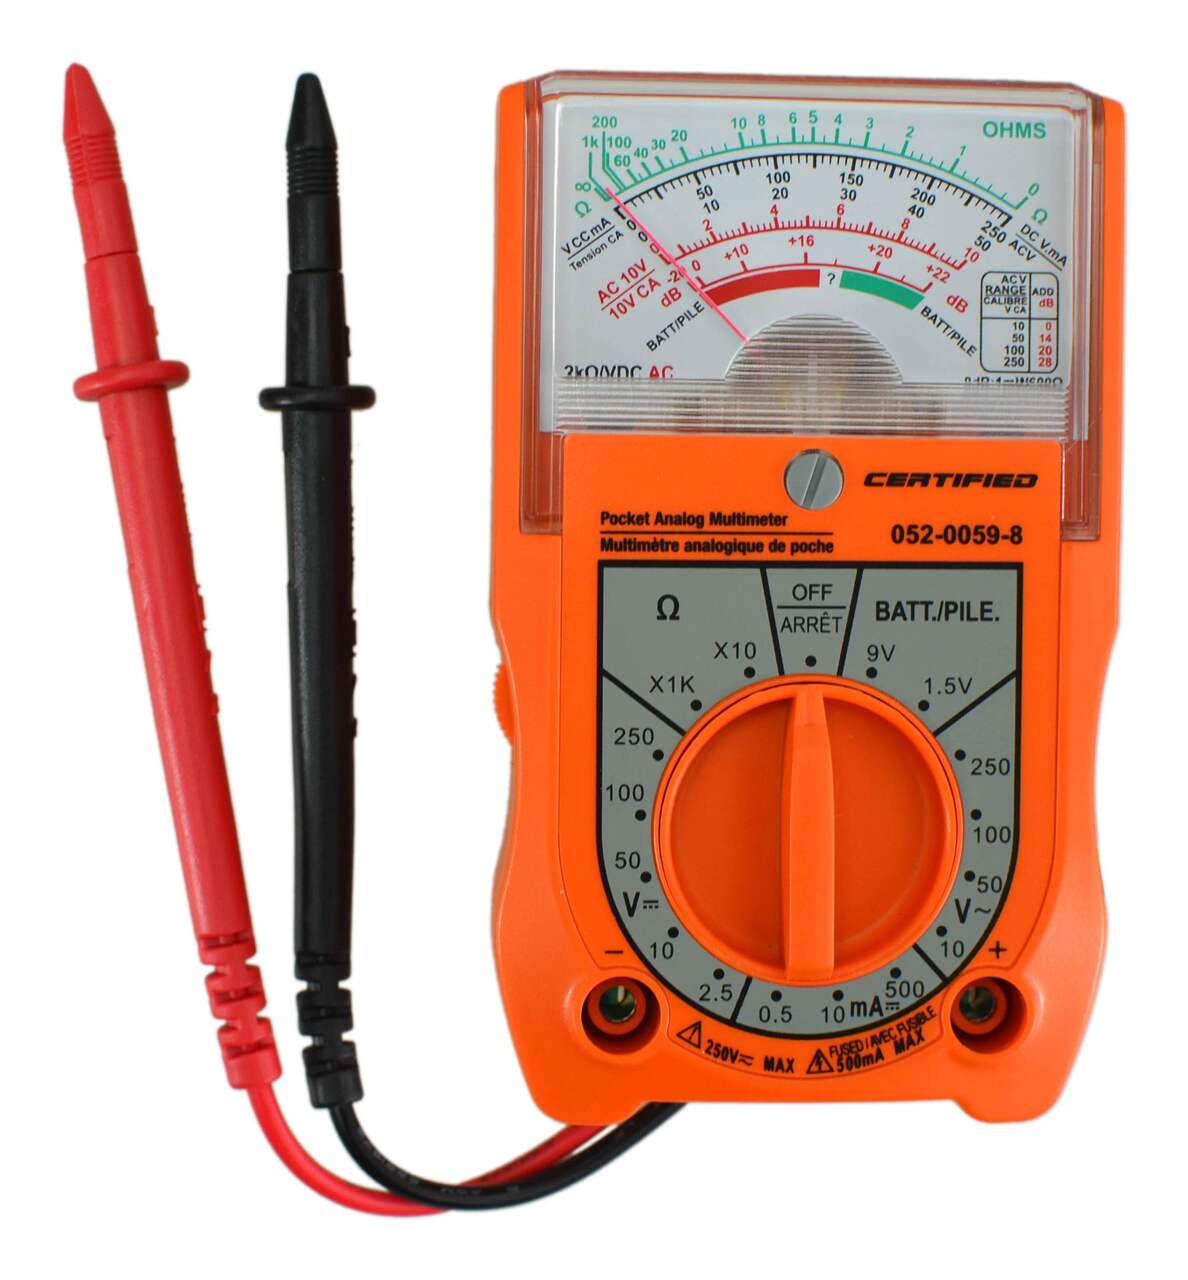 https://media-www.canadiantire.ca/product/fixing/electrical/rough-electrical/0520059/mini-analog-volt-ohm-meter-1be1692f-eb94-4f93-8fd2-0b9957fd5d54-jpgrendition.jpg?imdensity=1&imwidth=640&impolicy=mZoom